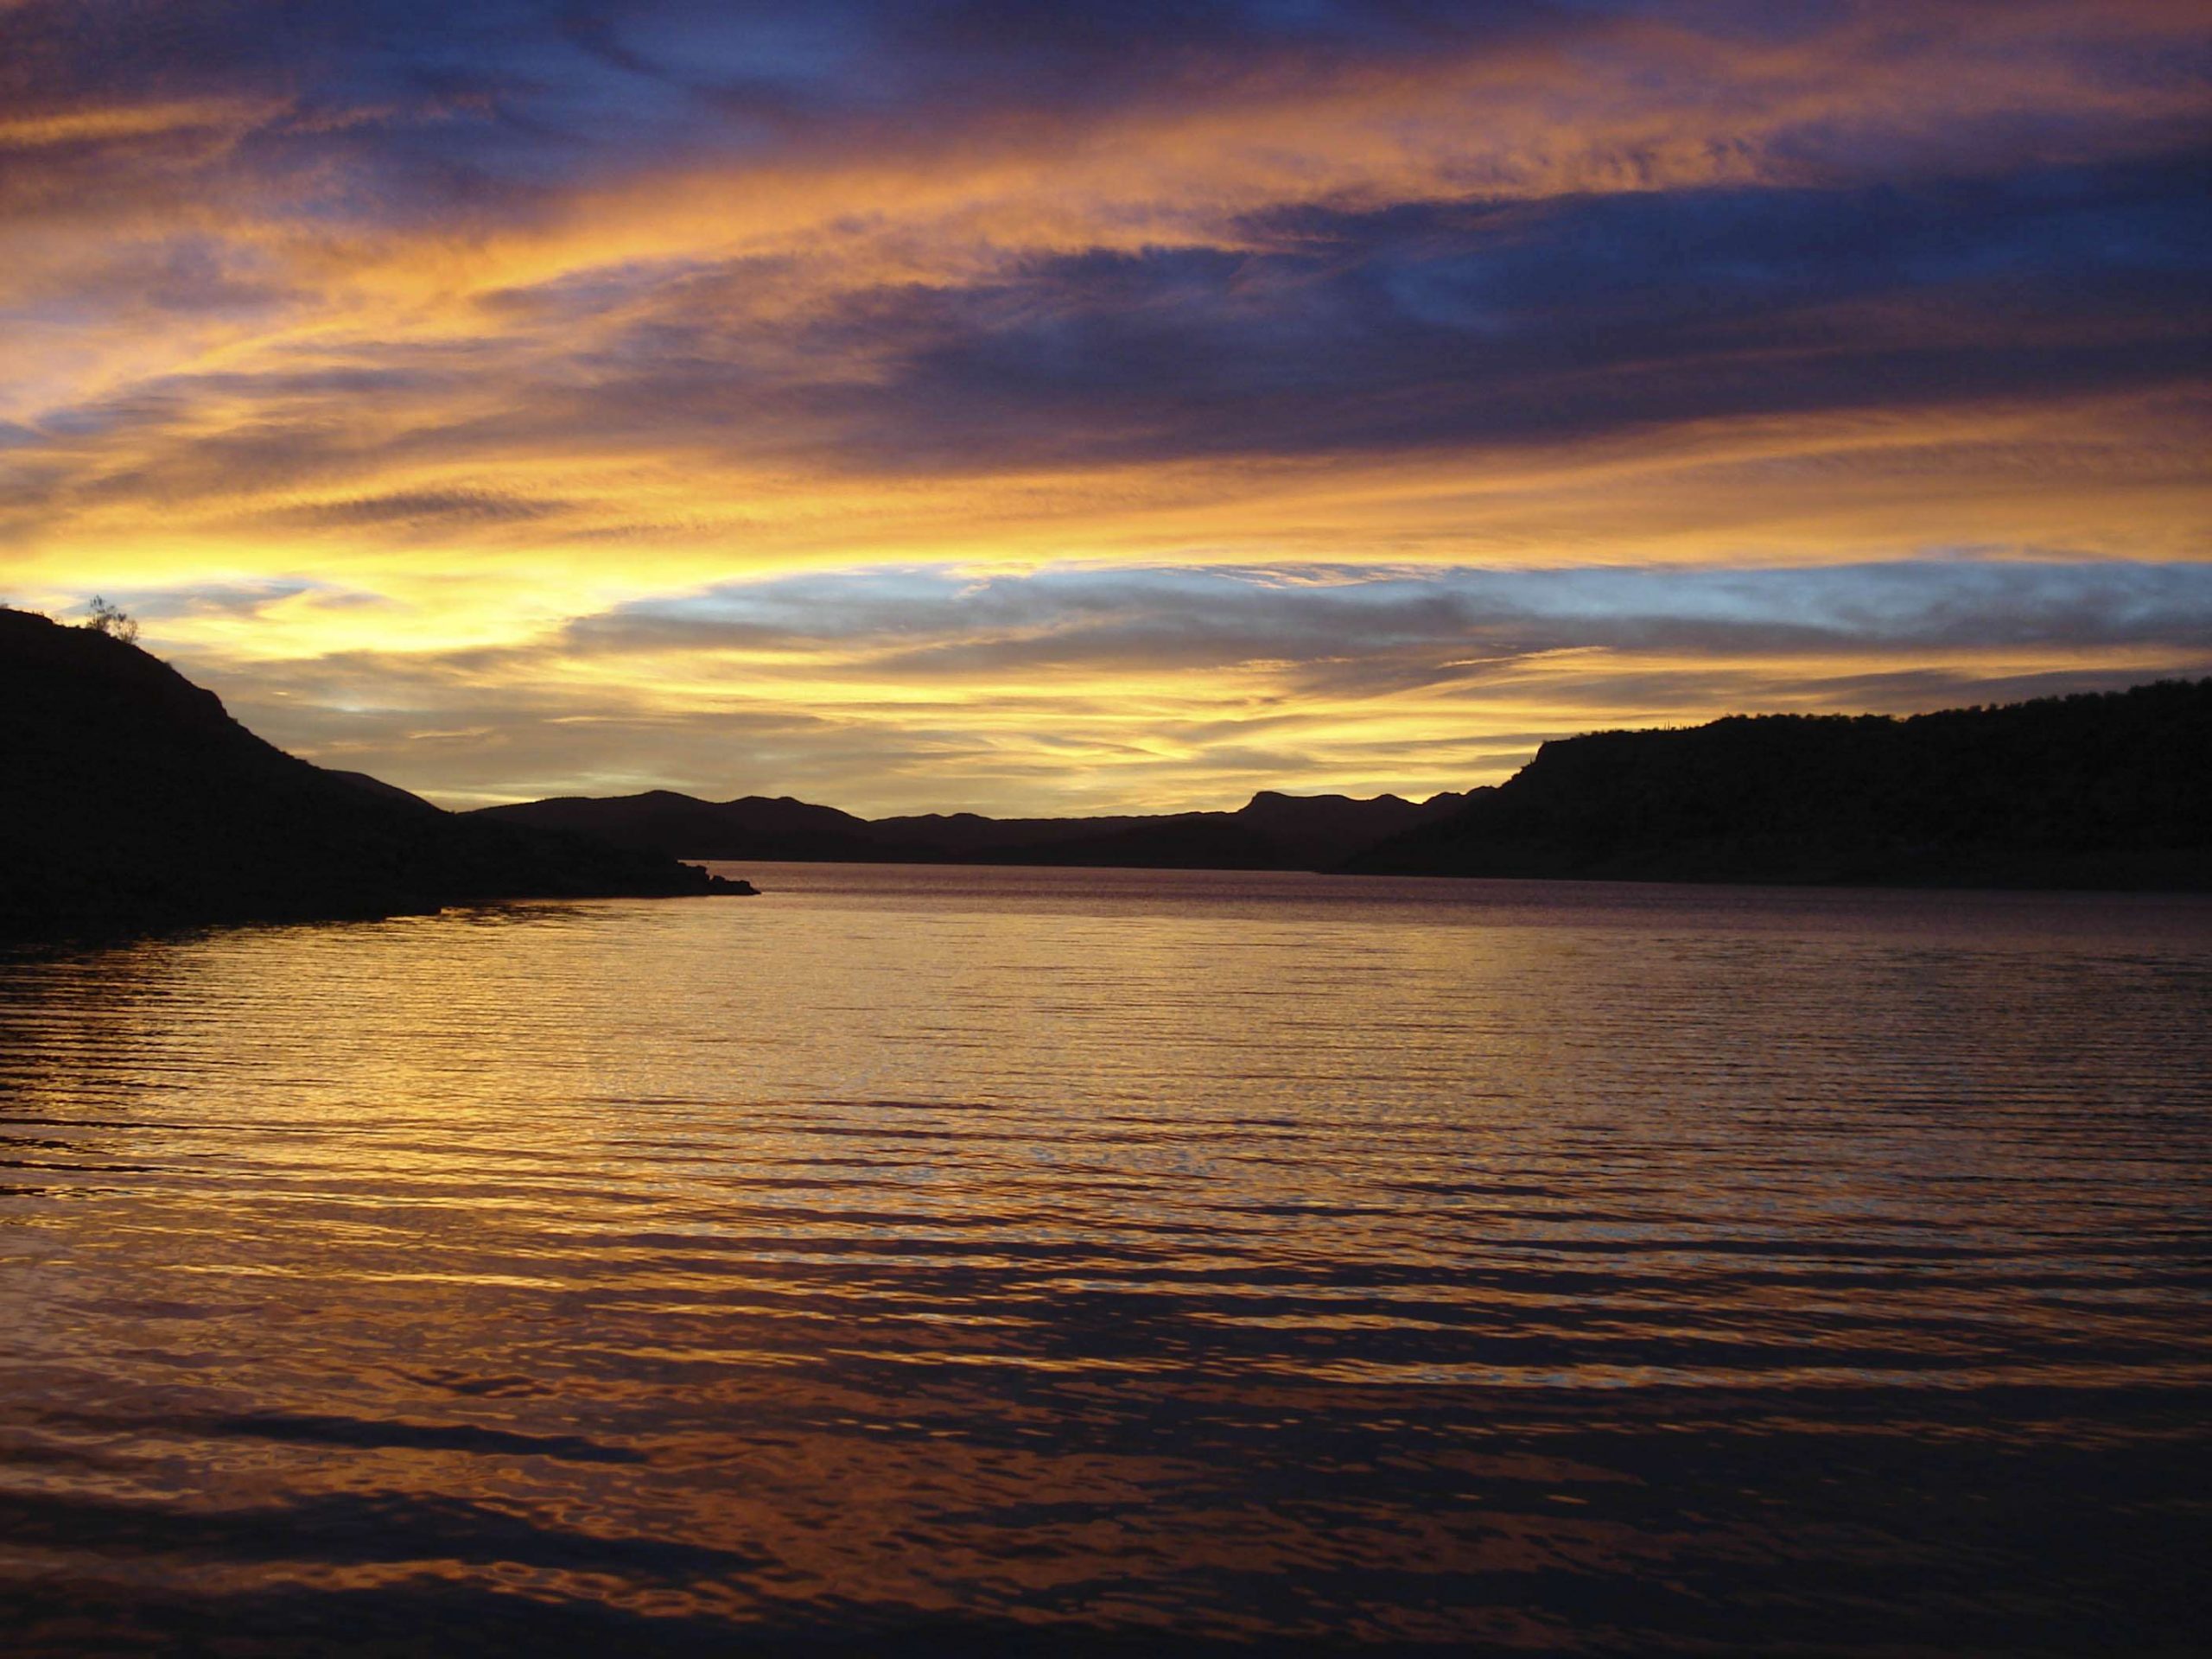 10. Saguaro Lake, Arizona [1,267 acres] With its towering red-orange cliffs, this westernmost reservoir on the Salt River may be Arizonaâs most underutilized bass fishery. There are plenty of big bass here, and it often takes more than 20 pounds to win a tournament. At a Monterey Bass Co. senior teams contest in January, the winners weighed a 23.43-pound limit that included an 8.22 big fish.